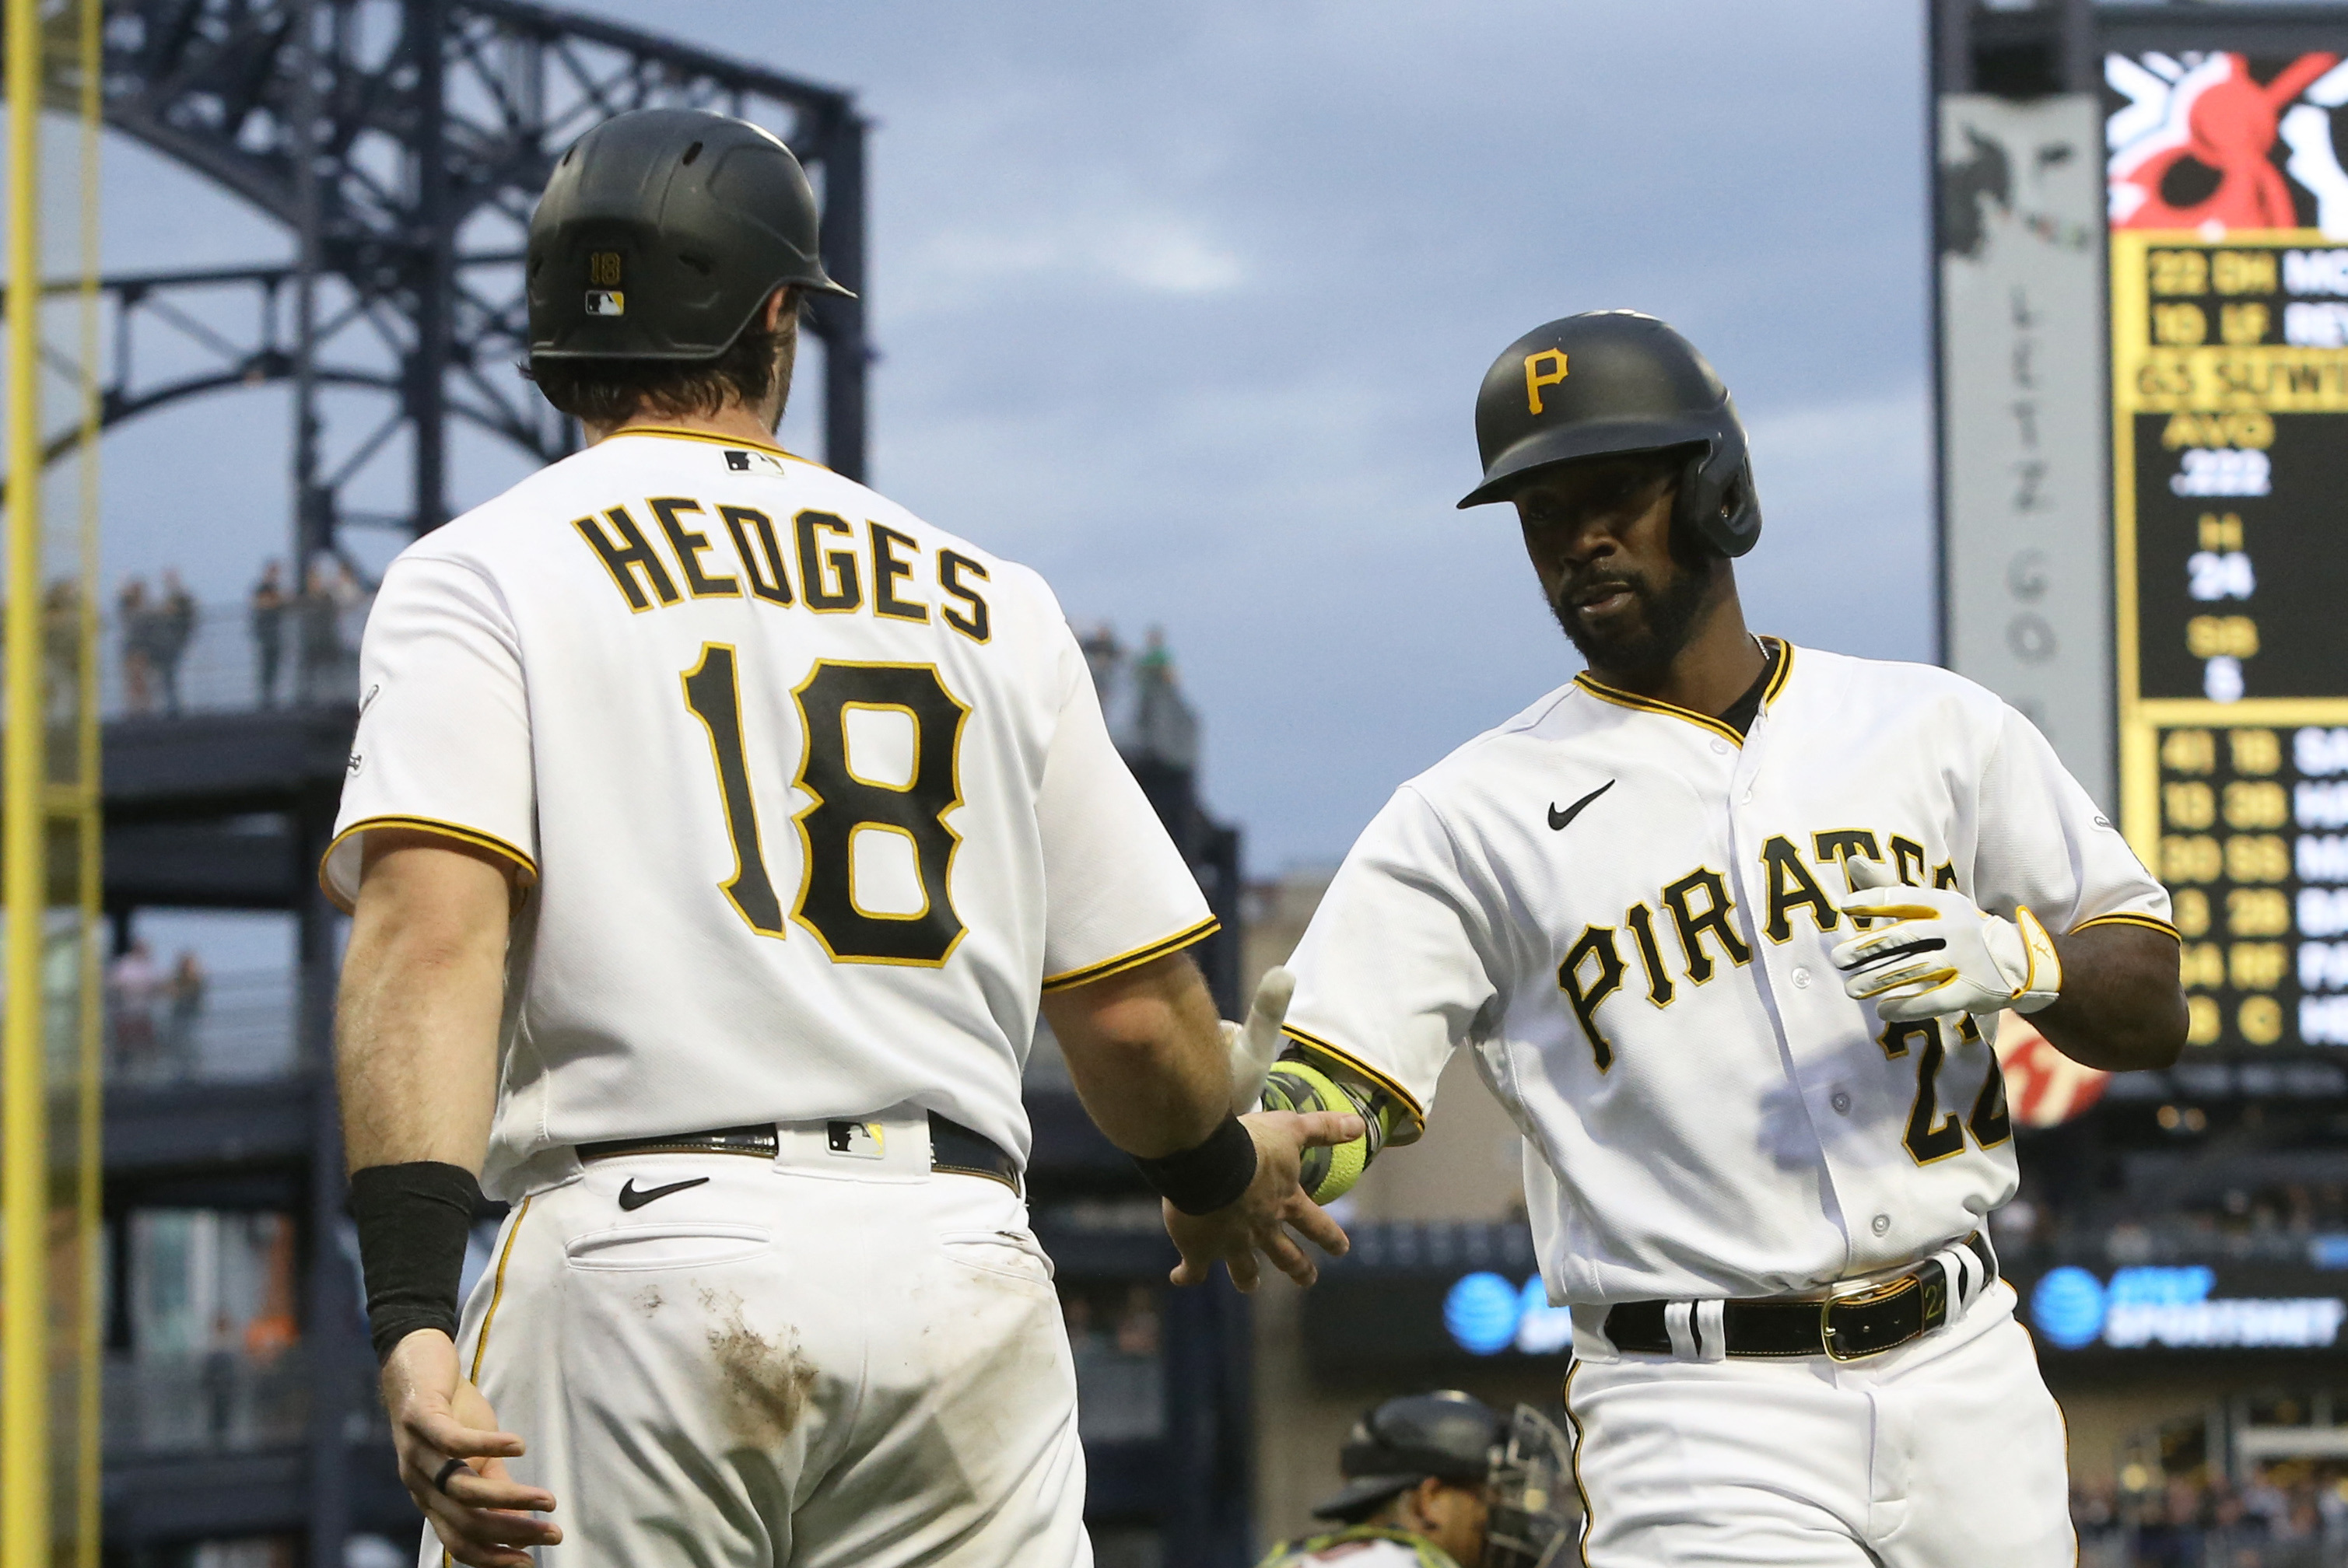 With game of catch, Andrew McCutchen, Ke'Bryan Hayes begin bond as